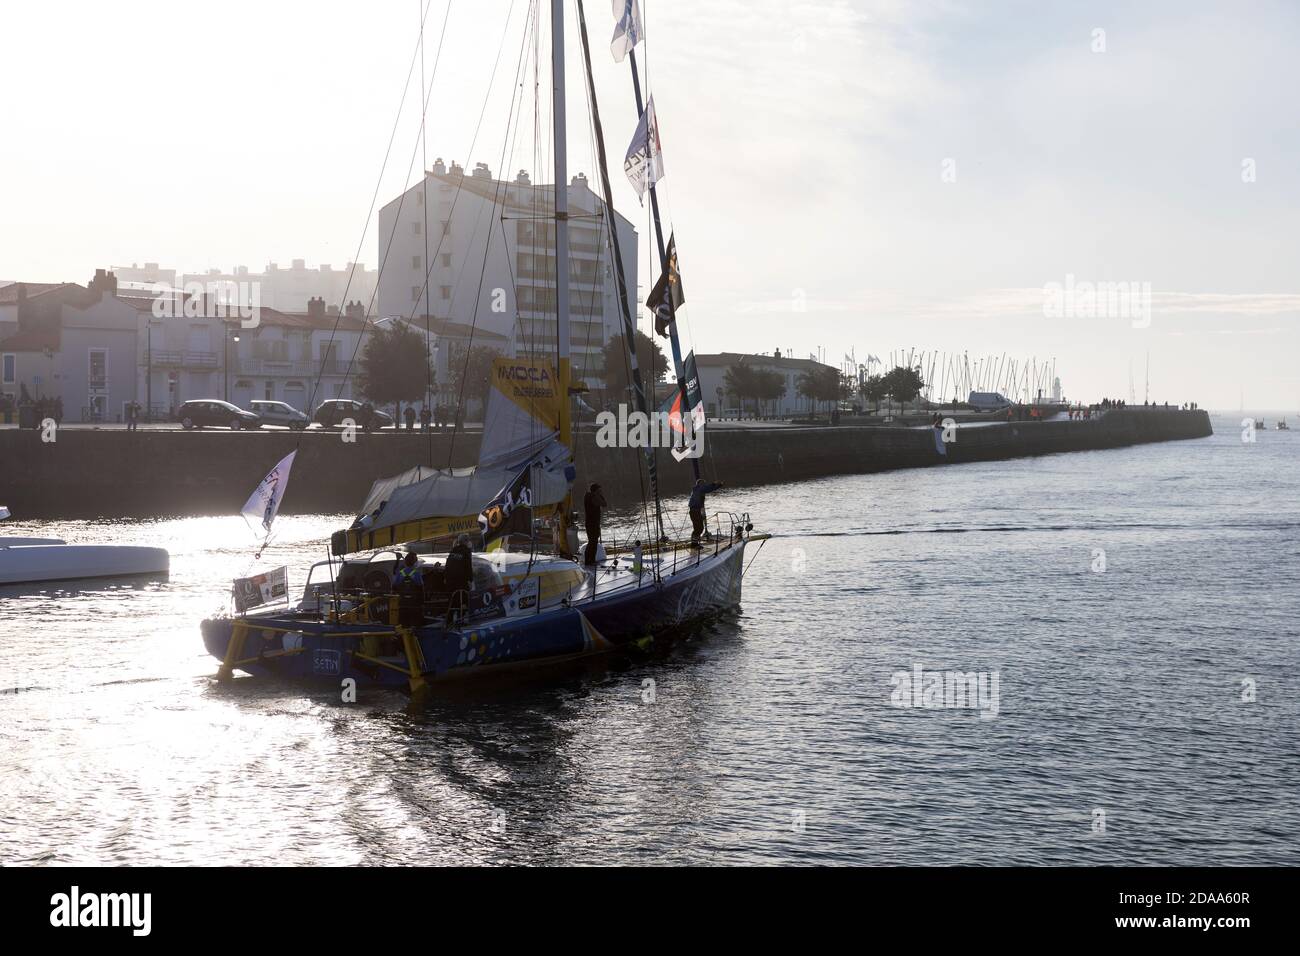 LES SABLES D'OLONNE, FRANCE - NOVEMBER 08, 2020: Manuel Cousin boat (Groupe Setin) in the channel for the start of the Vendee Globe 2020 Stock Photo